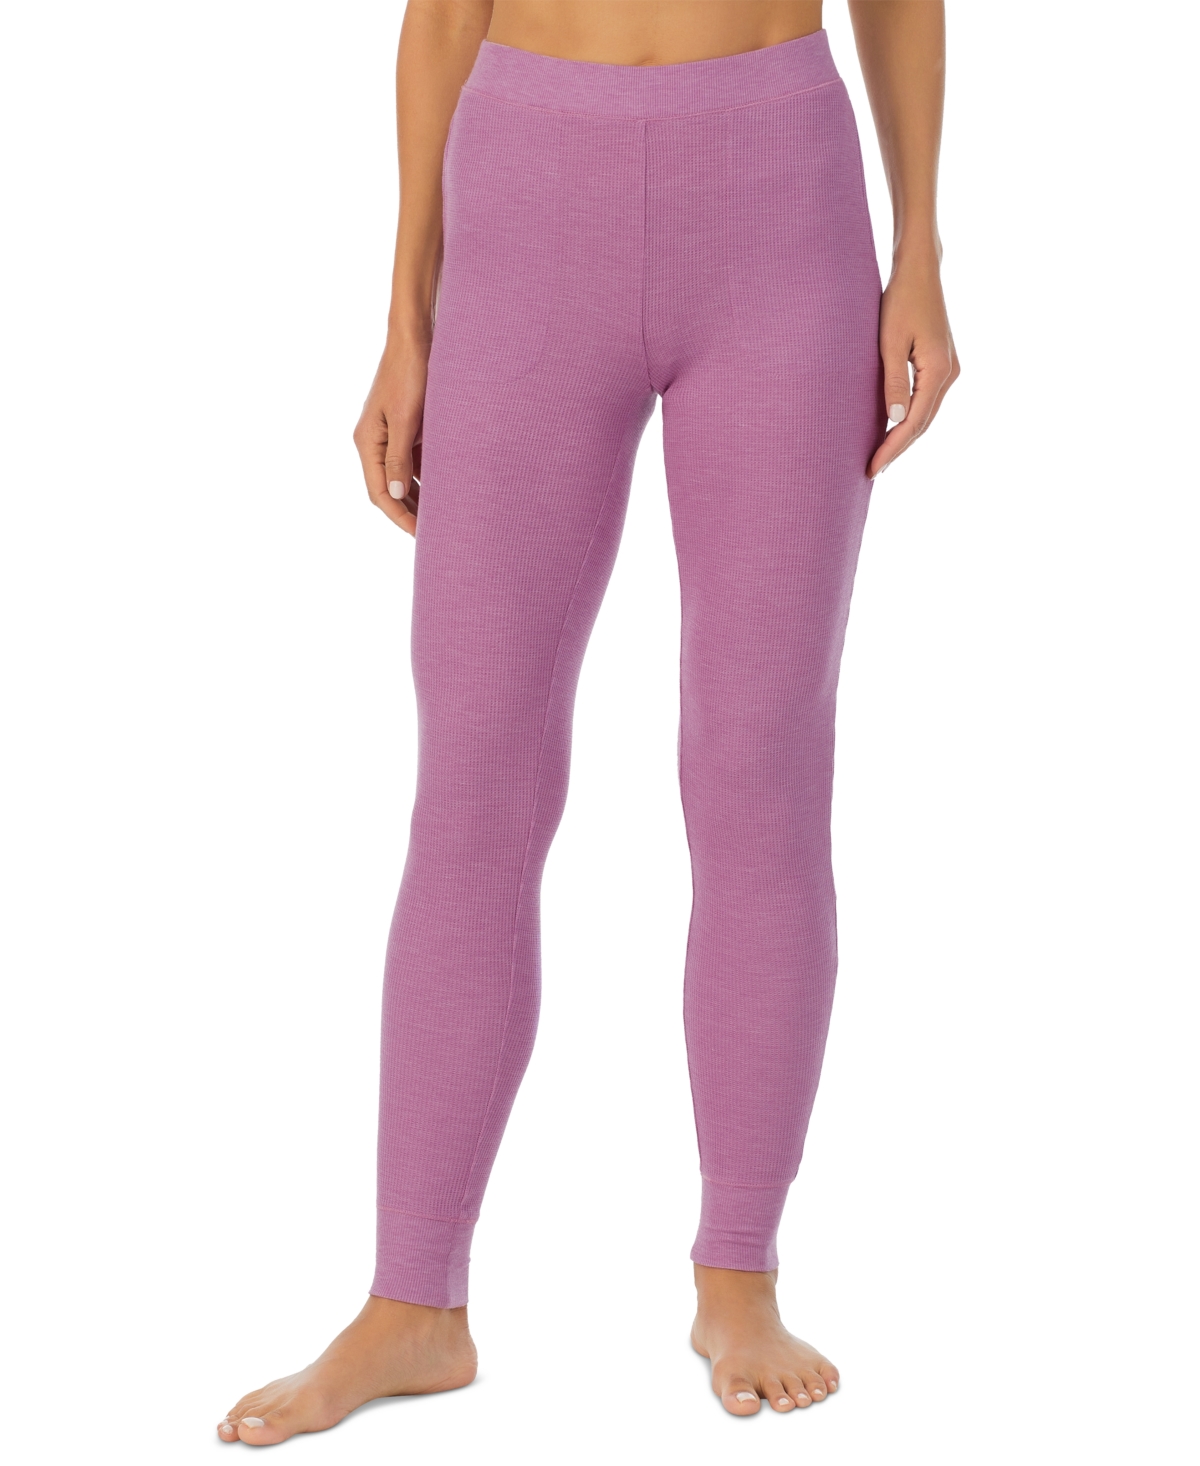 Women's Stretch Thermal Mid-Rise Leggings - Mulberry Mist Heather